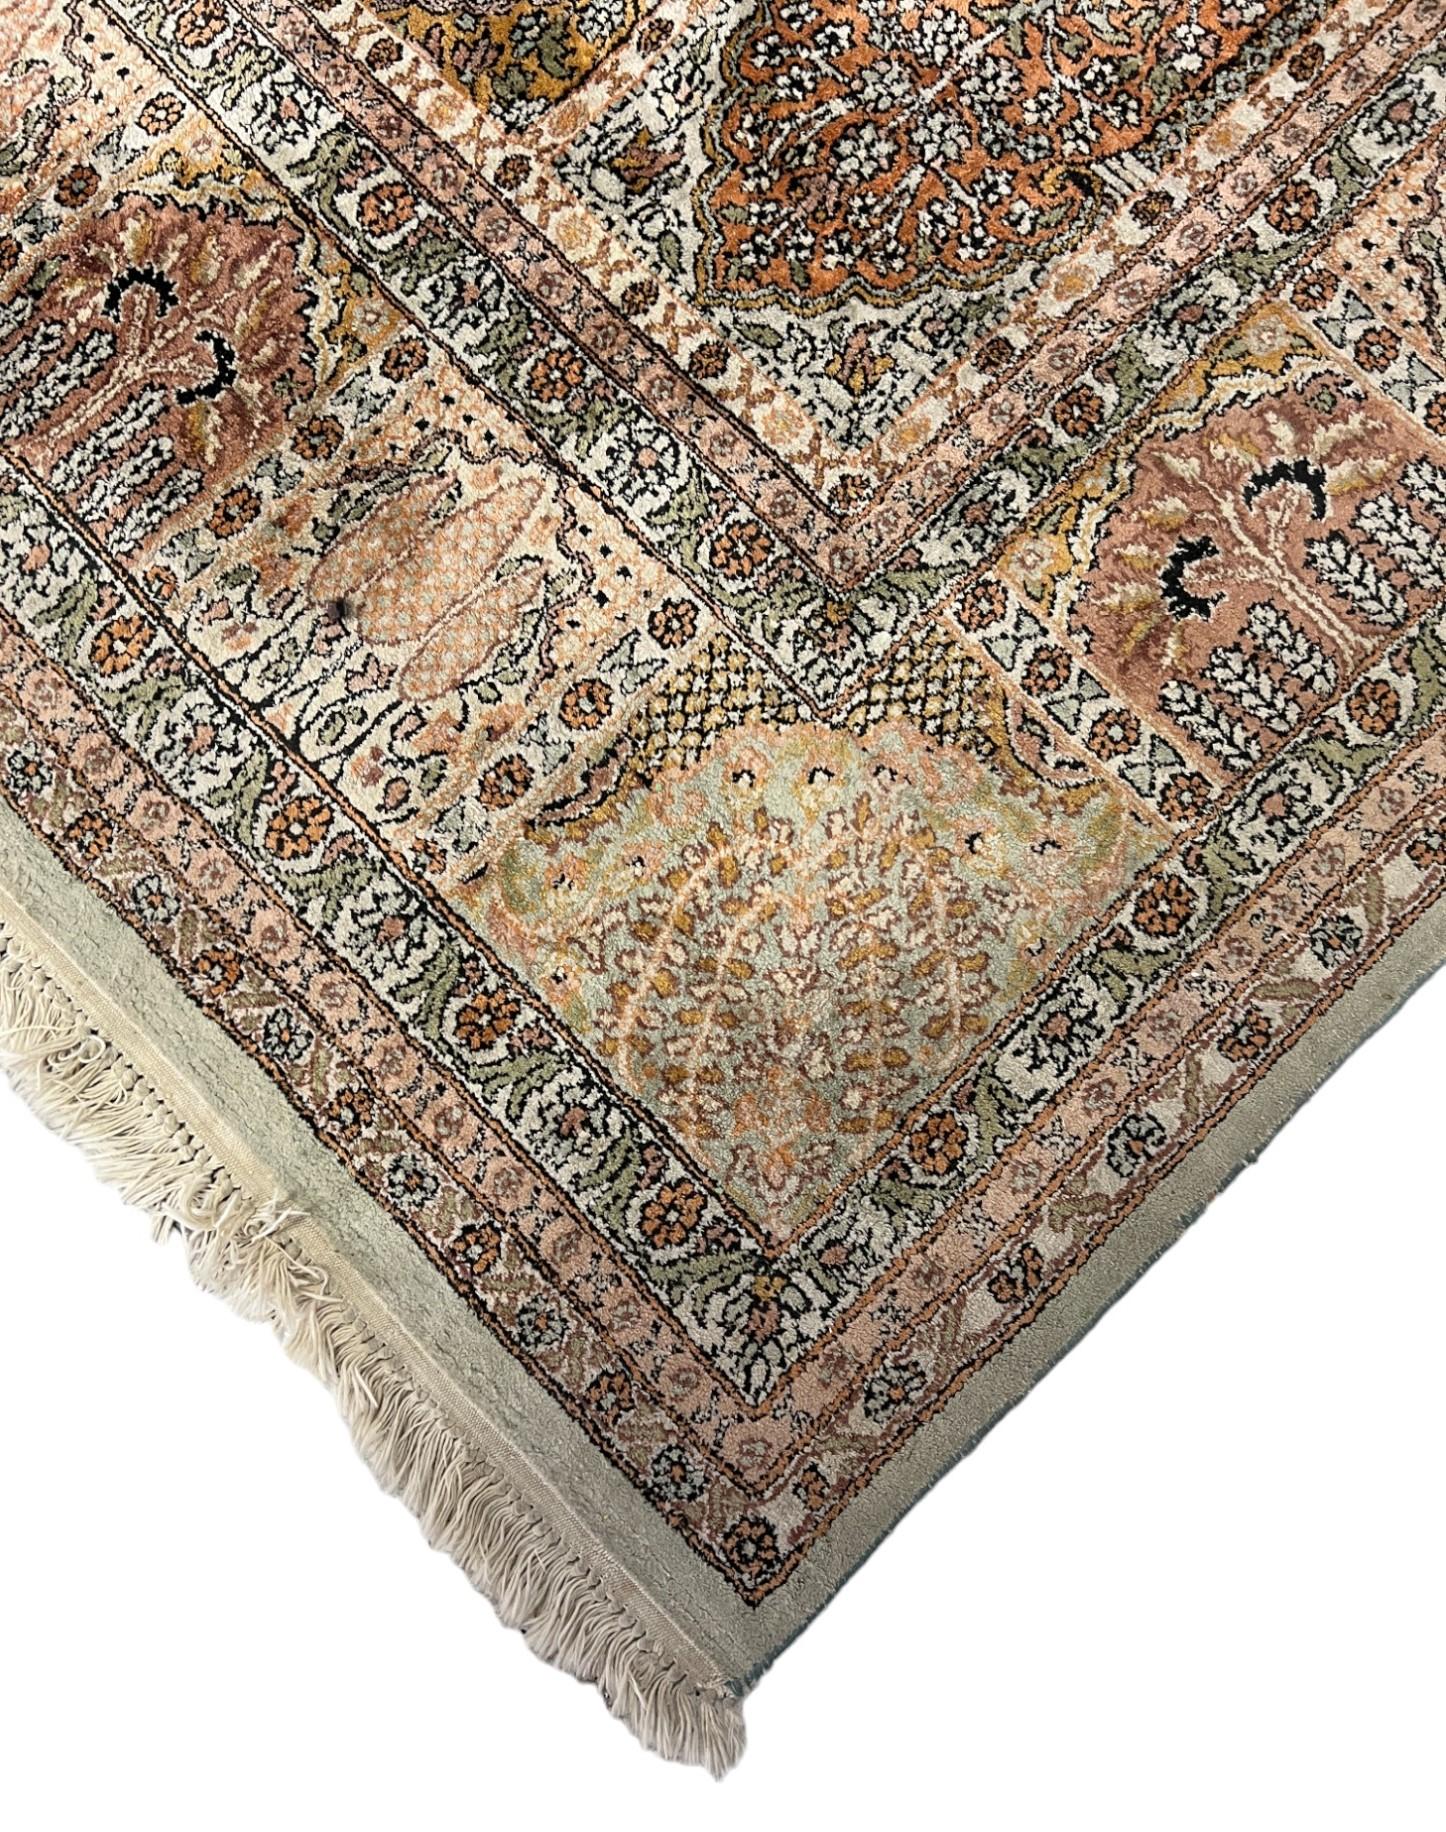 Hand-Knotted Kashmir Silk Pile Rug - 12' x 18' For Sale 11